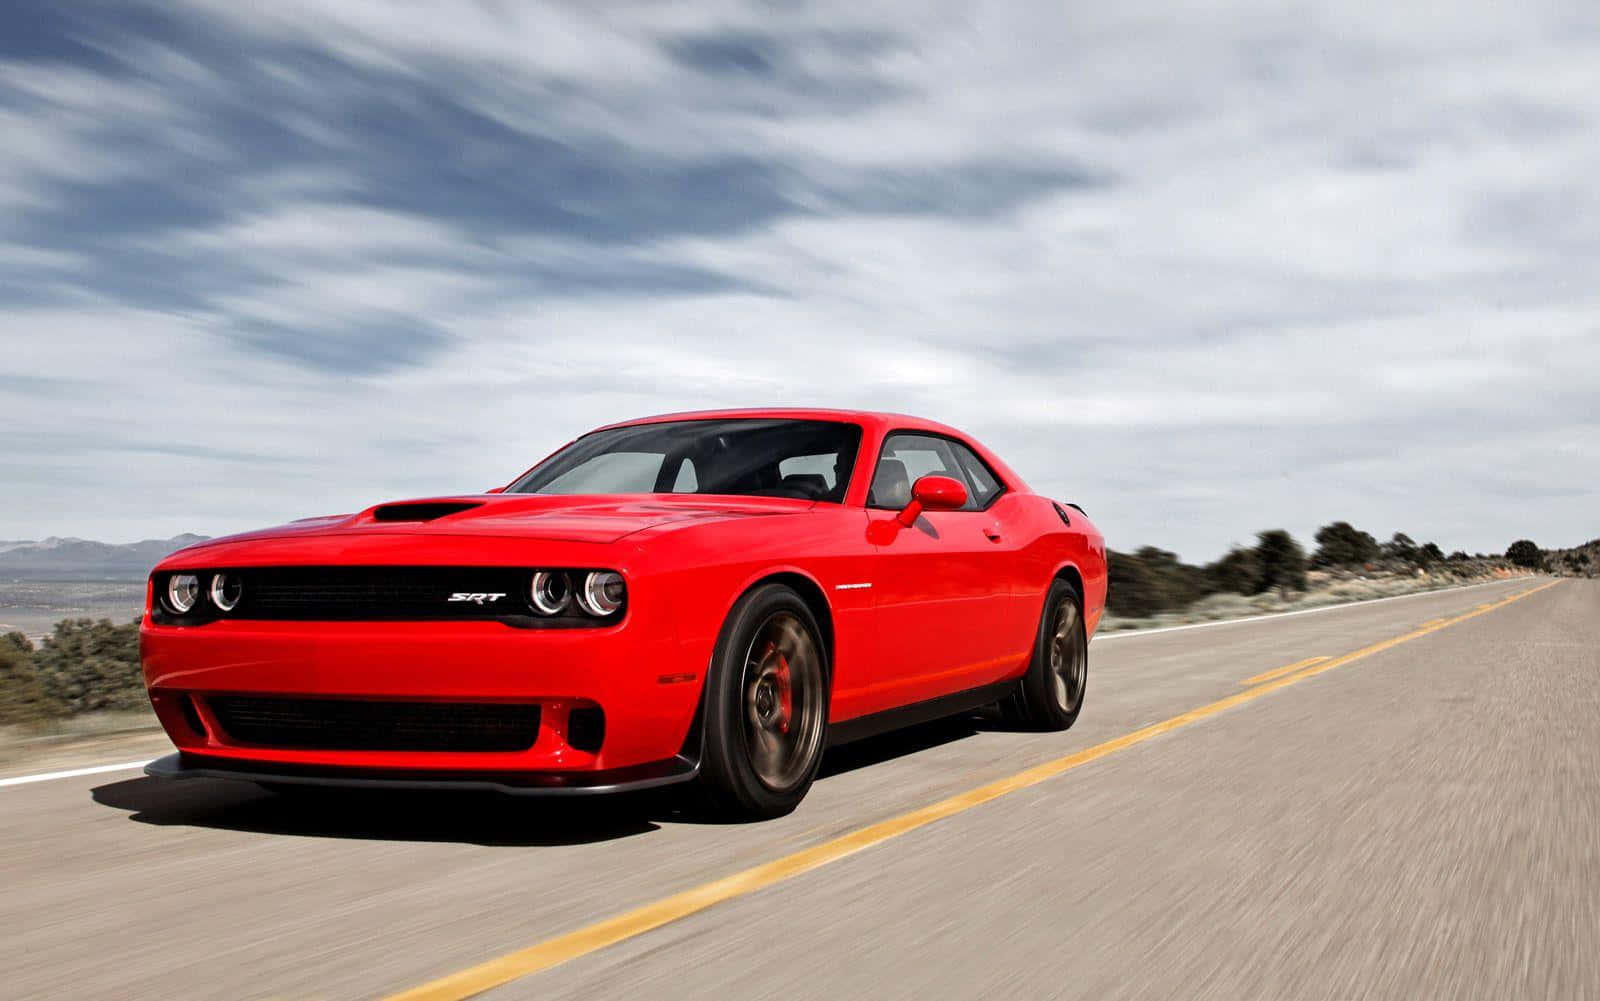 Red Dodge Challenger S R T On The Move Wallpaper